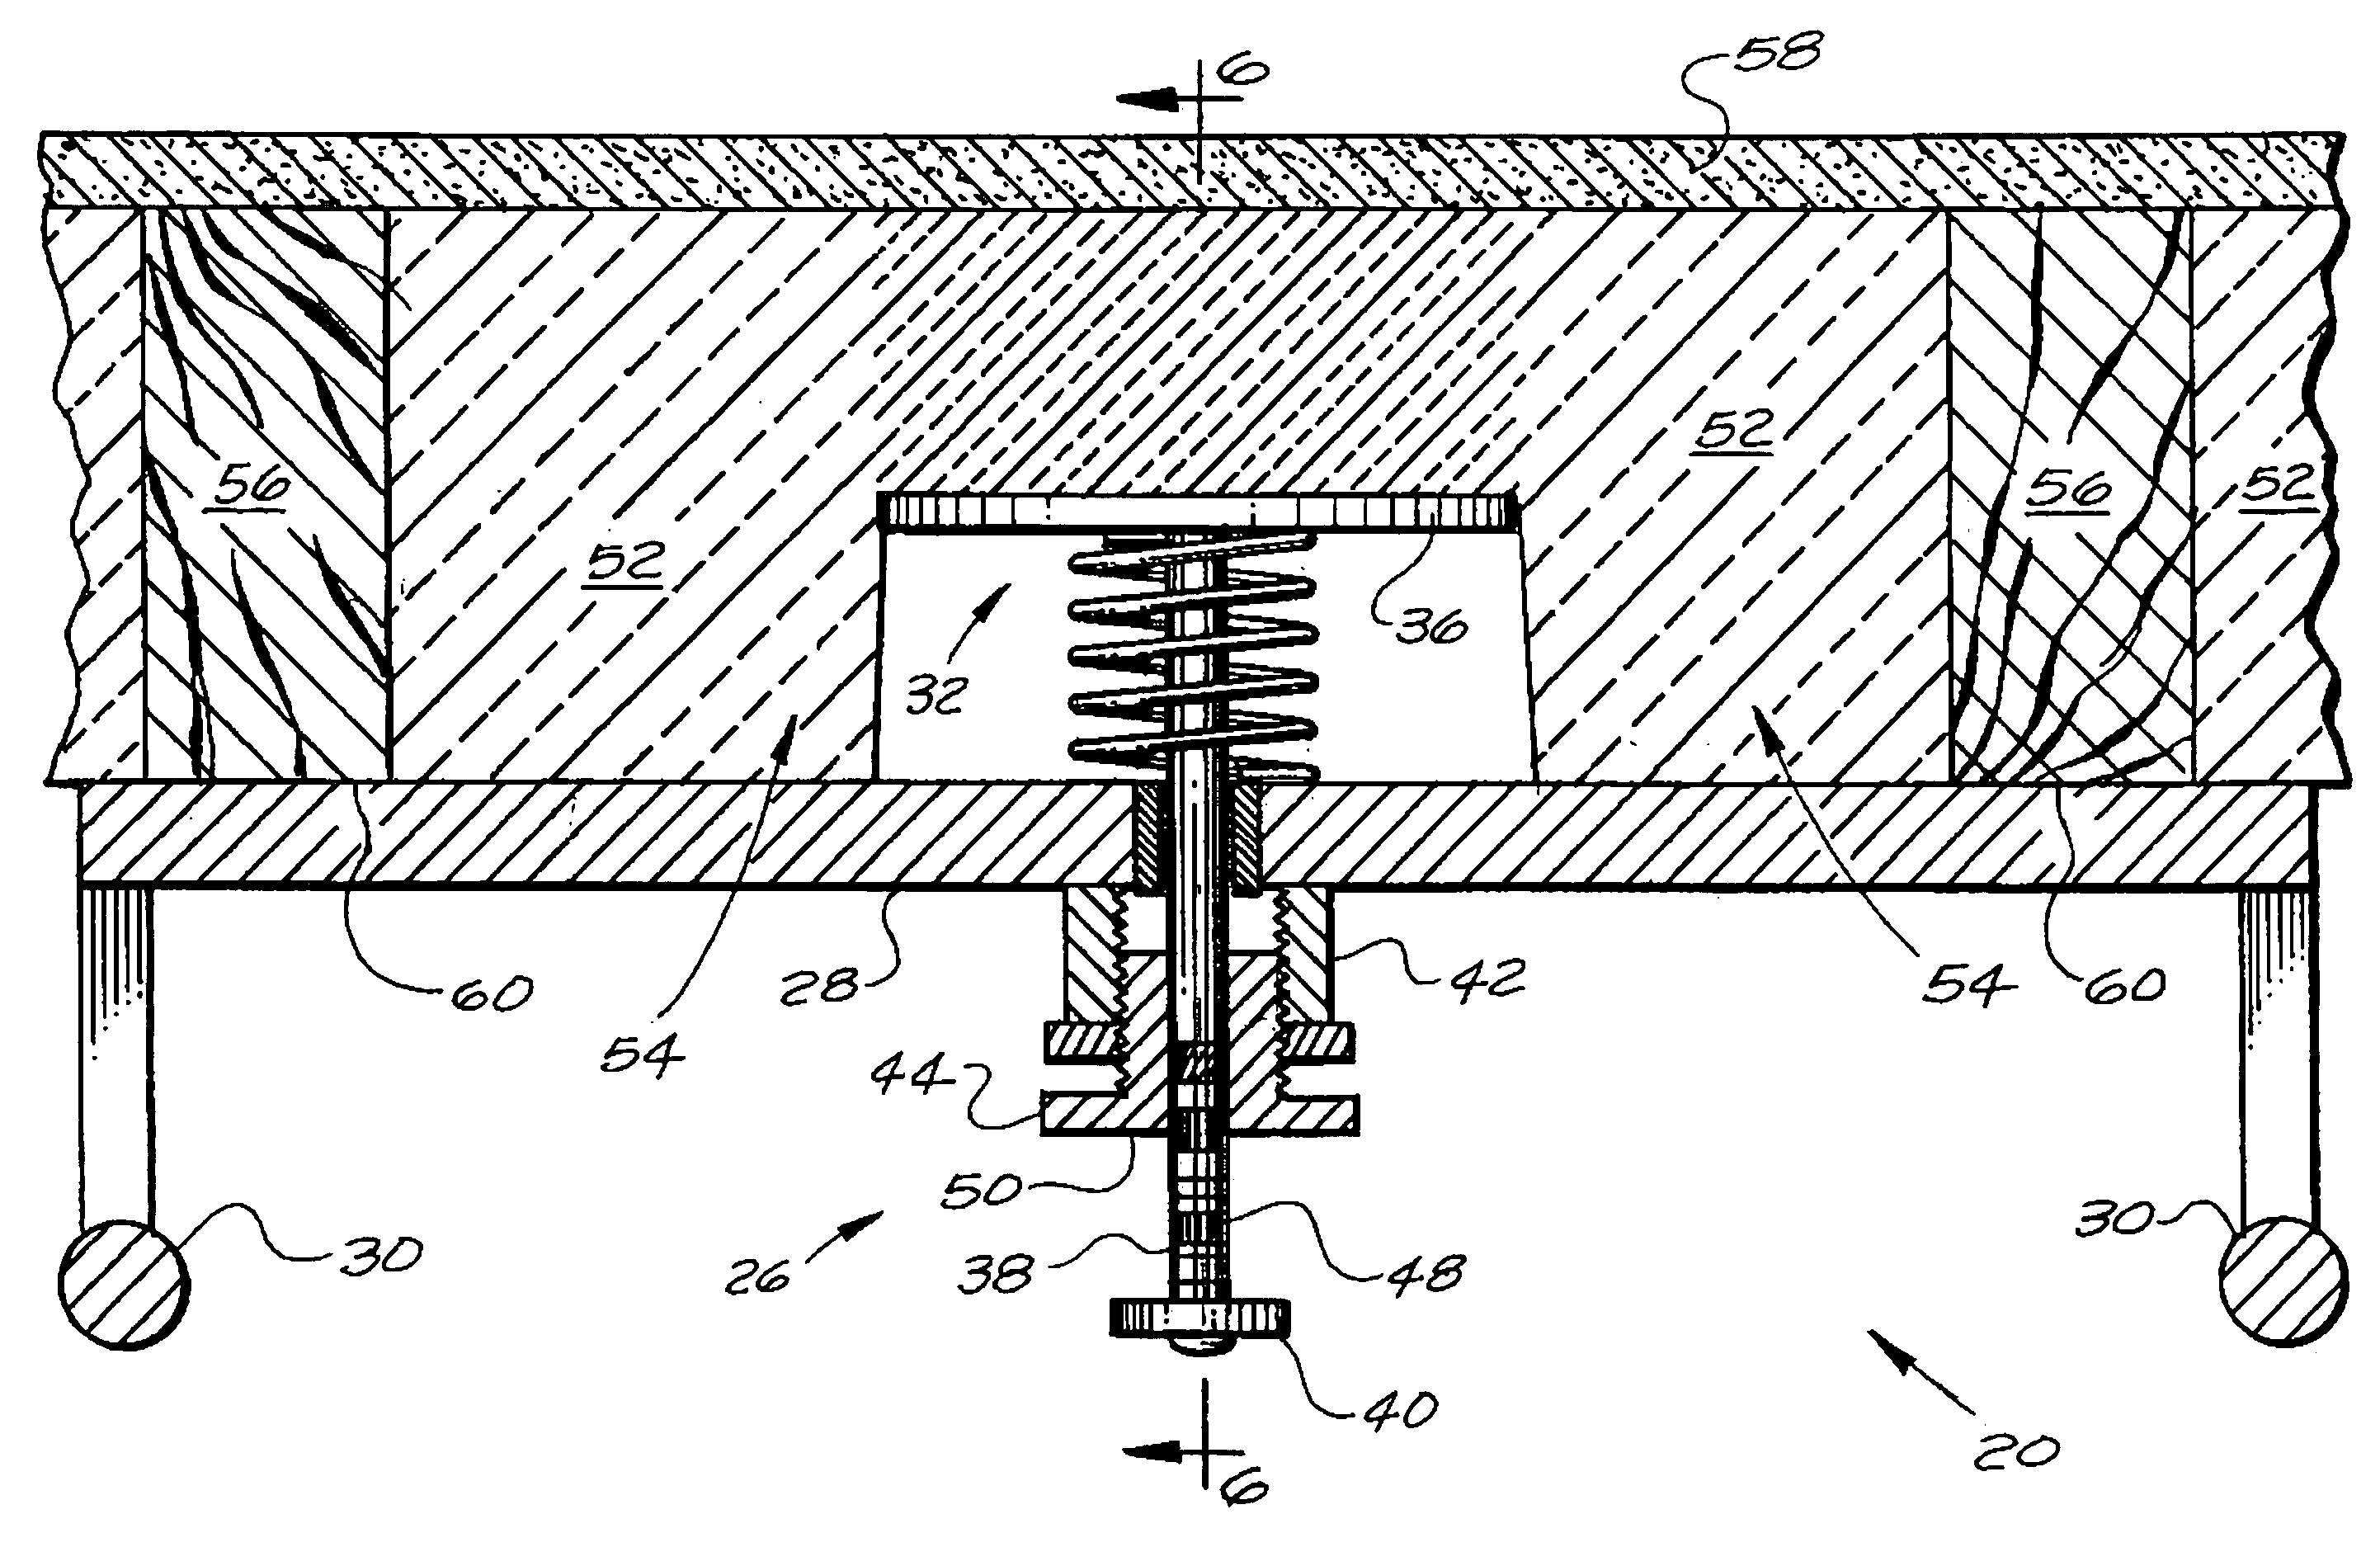 Gauge and method for indicating one or more properties of a loose-fill insulation